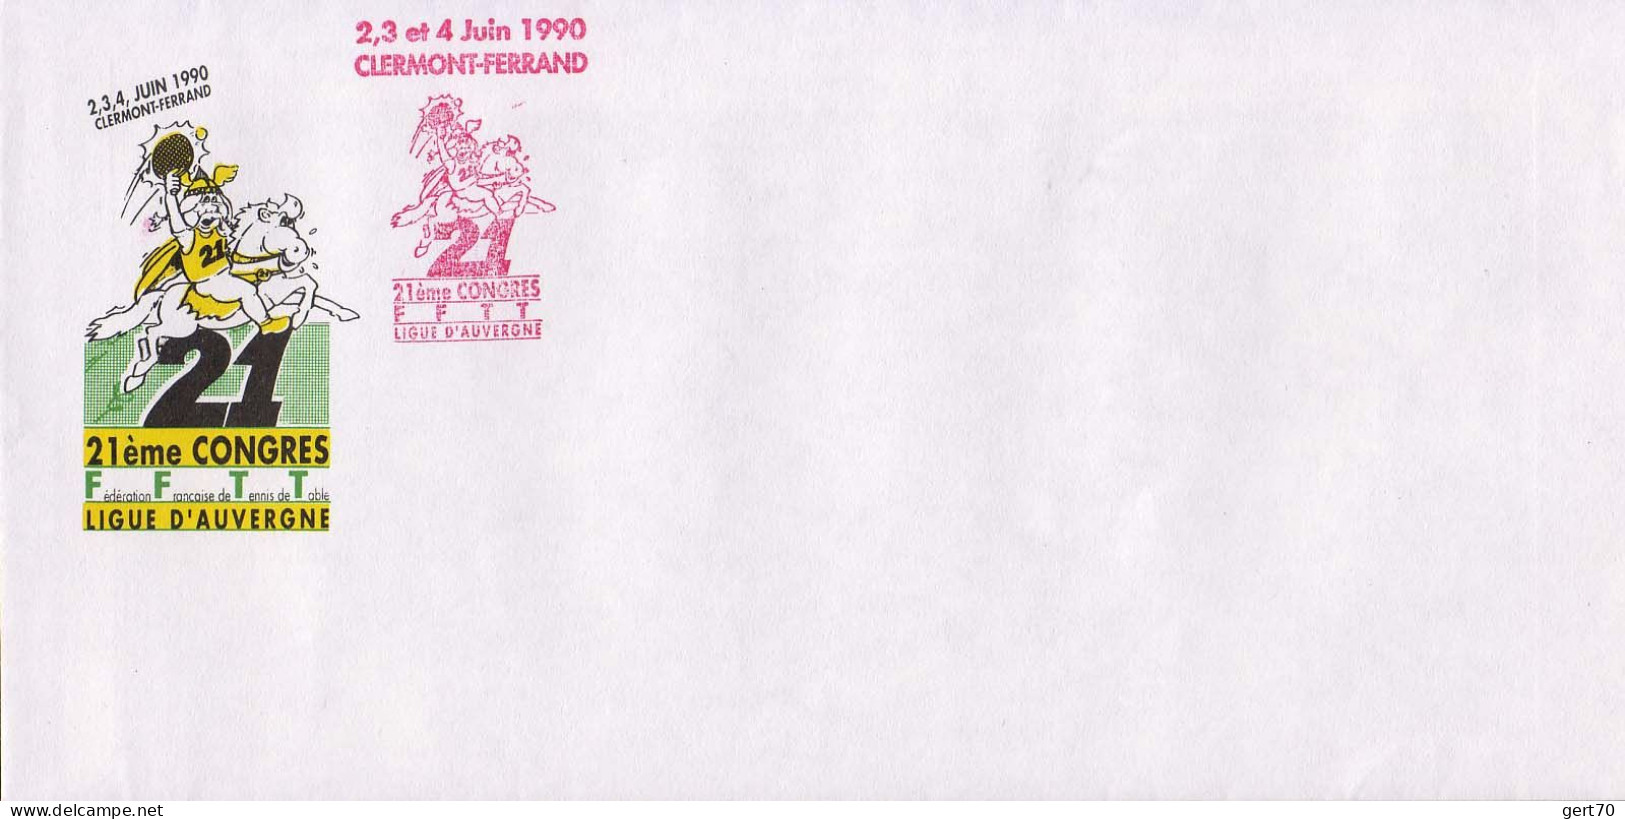 France 1990, Mint Cover / Enveloppe Vierge / 21st French TT Congress / Clermont-Ferrand - Tennis Tavolo